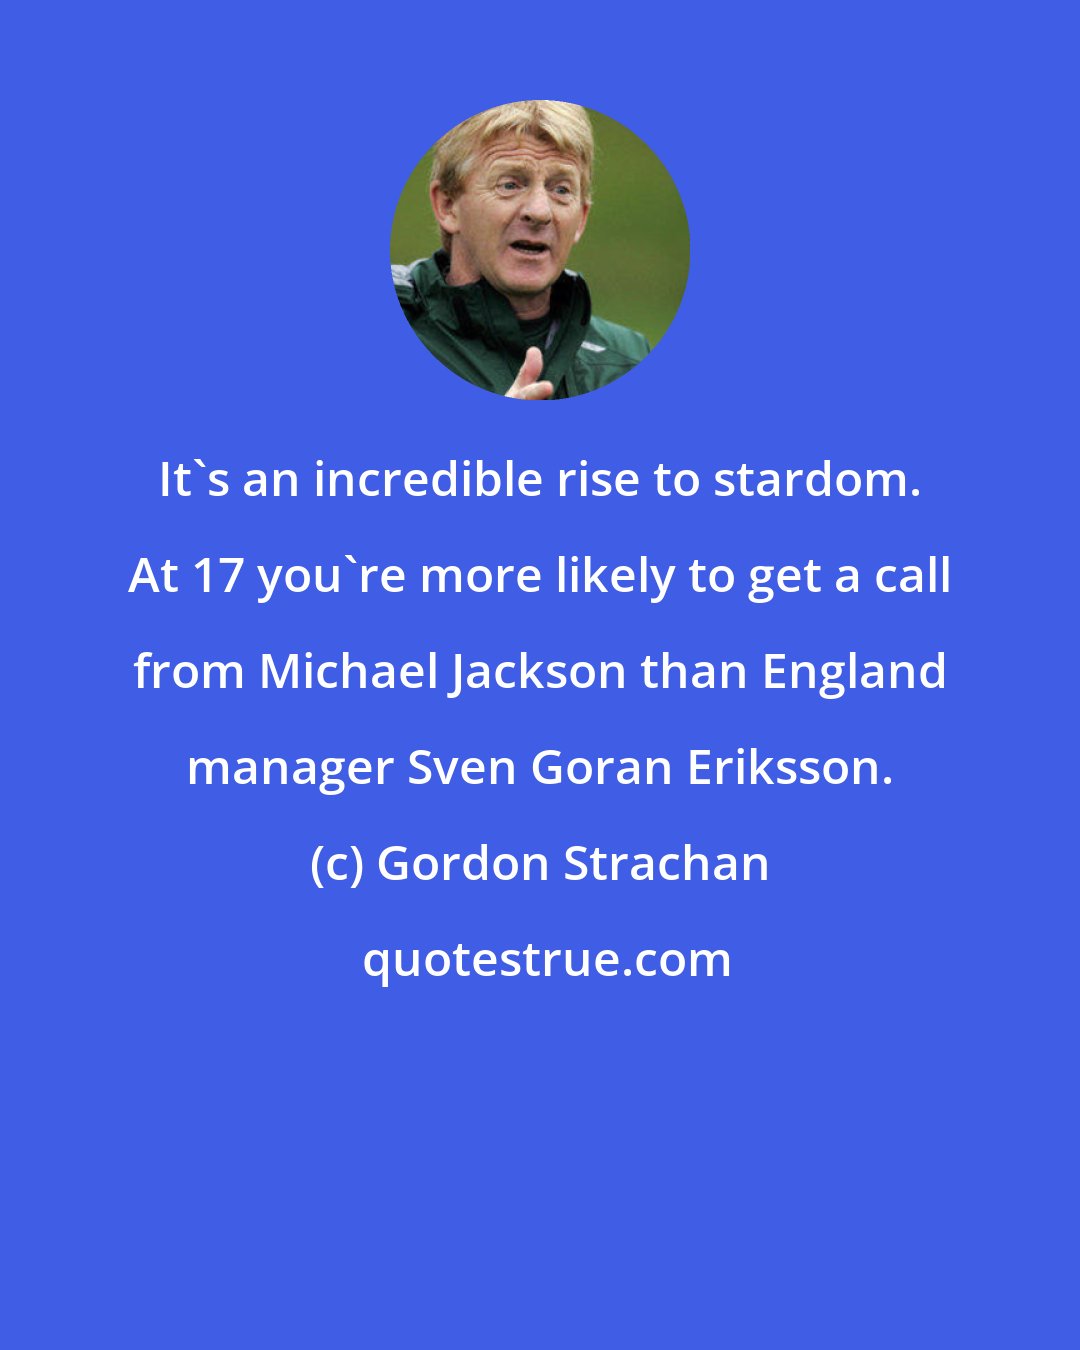 Gordon Strachan: It's an incredible rise to stardom. At 17 you're more likely to get a call from Michael Jackson than England manager Sven Goran Eriksson.